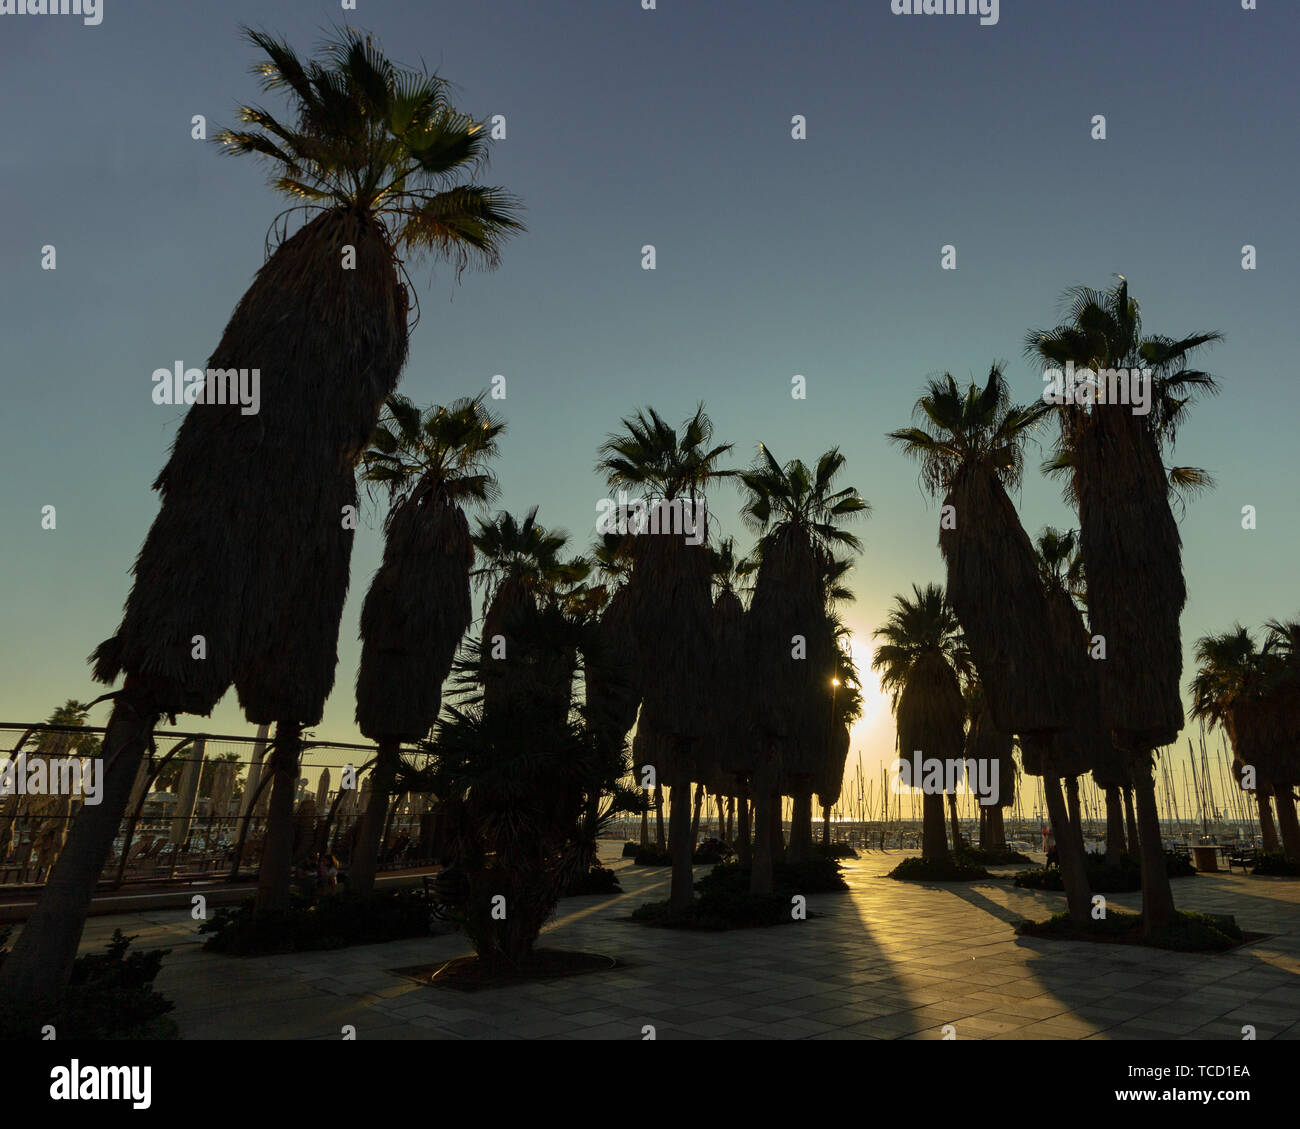 A grove of palm trees are in silhouette in a public square in front of a marina at sunset Stock Photo